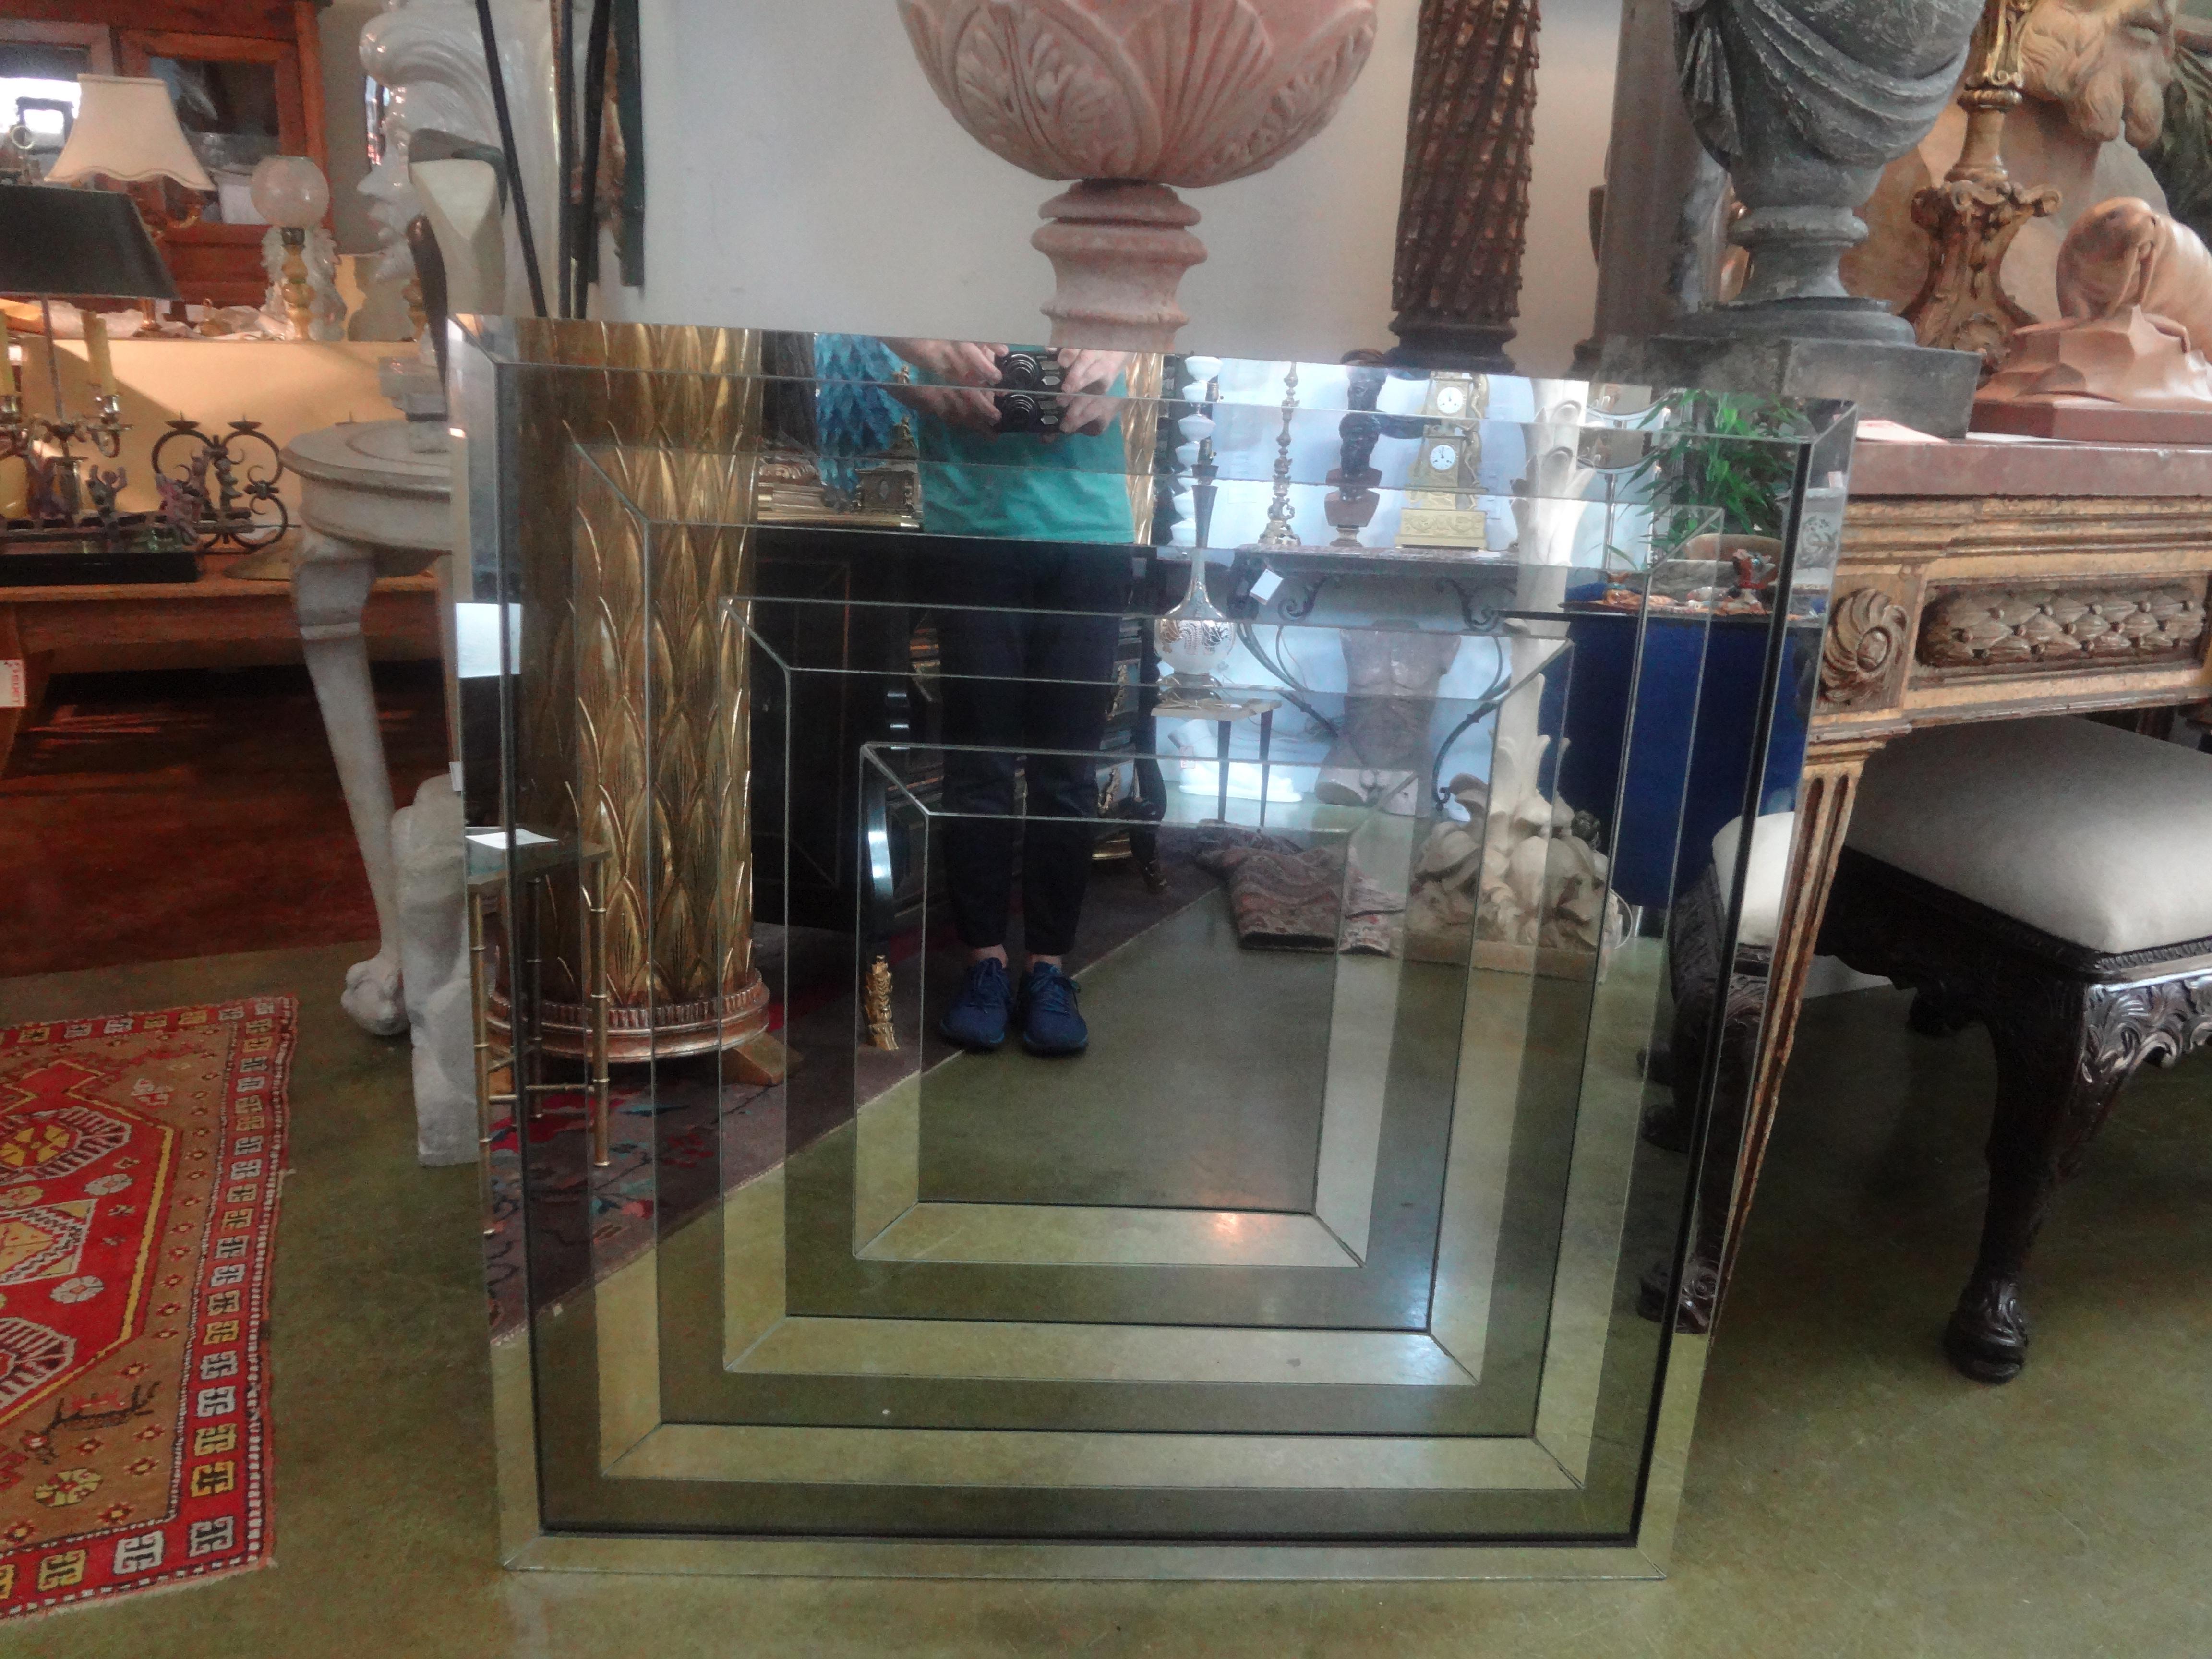 Mid Century Modern Geometric Mirror.
This stunning vintage square mirror has an infinity design with alternating silver and bronzed mirrored panels. Great design!